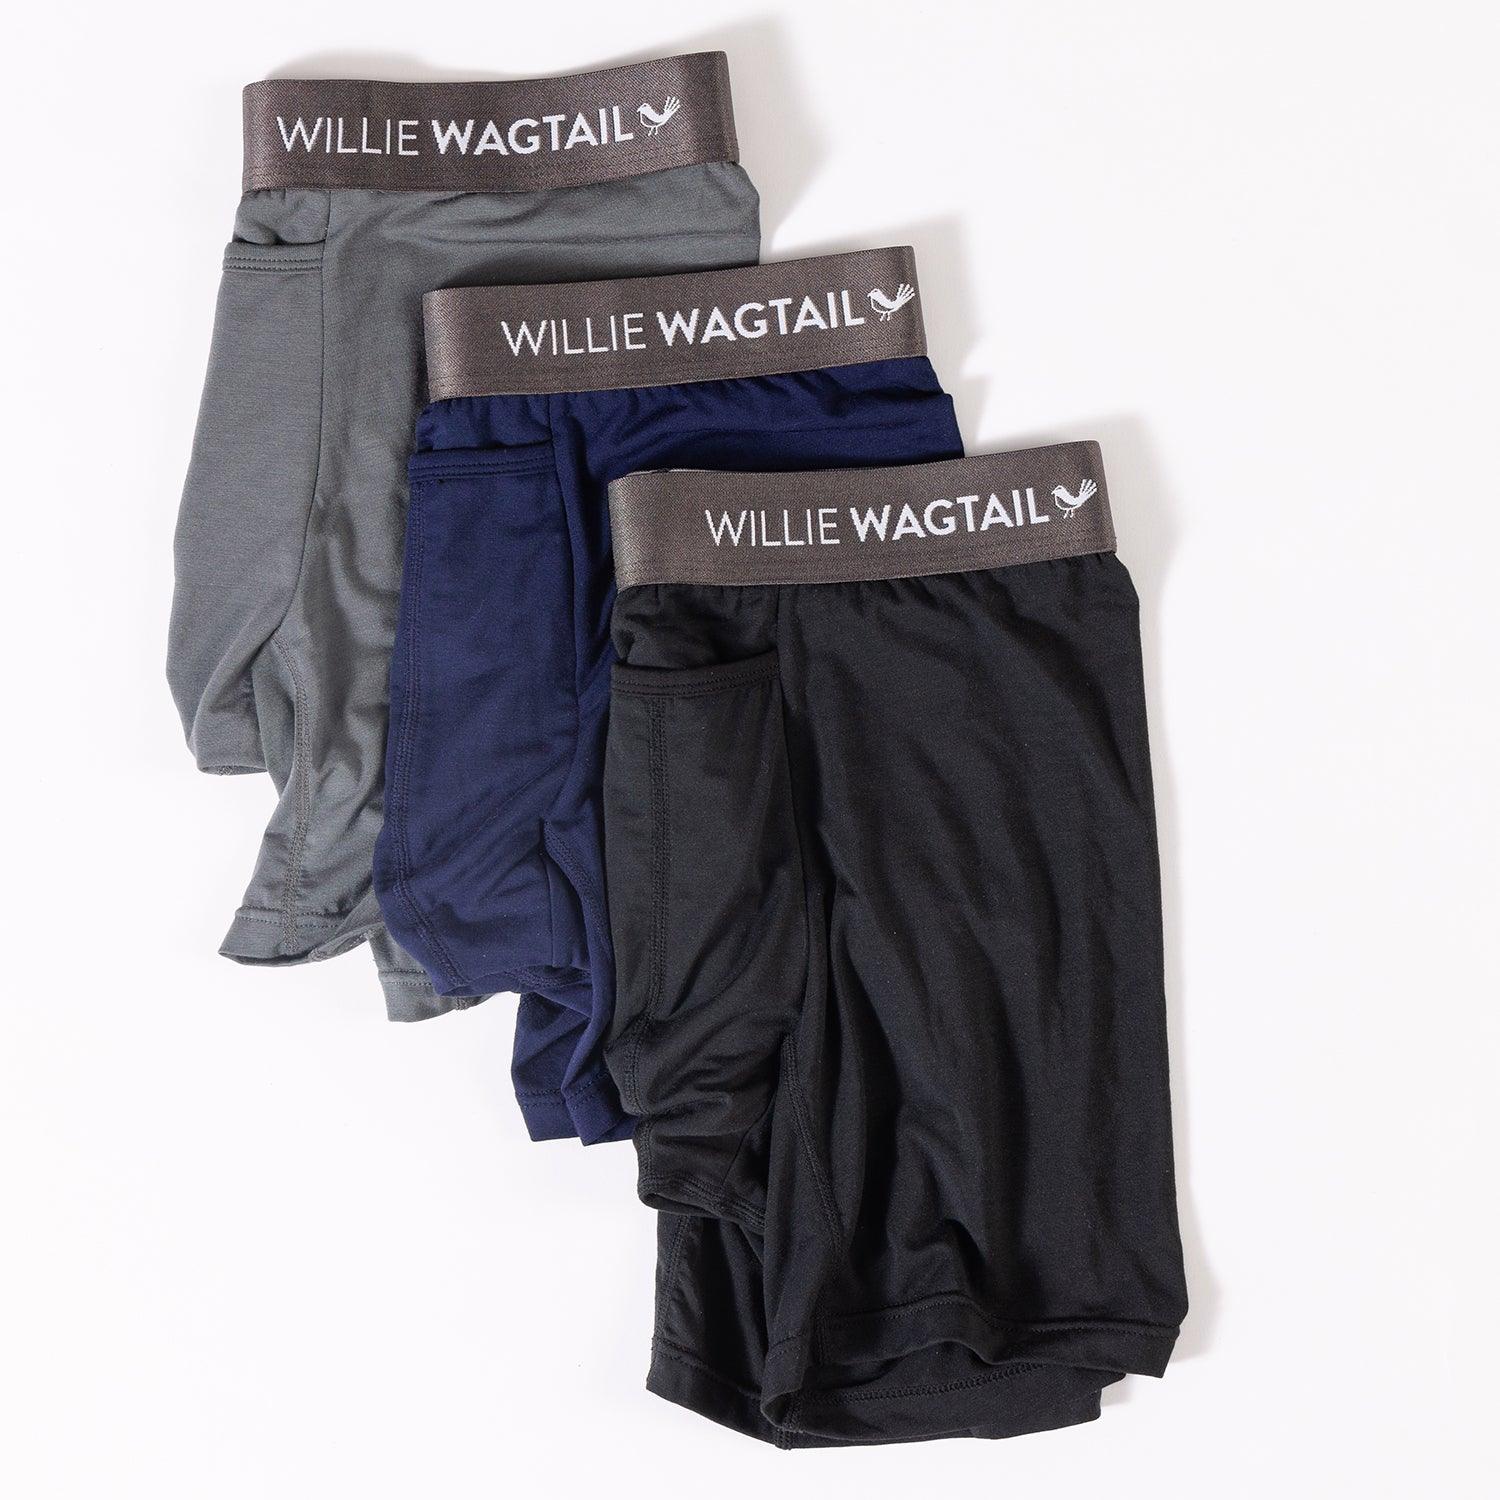 No Skids Pack (3-Pack) - Willie Wagtail